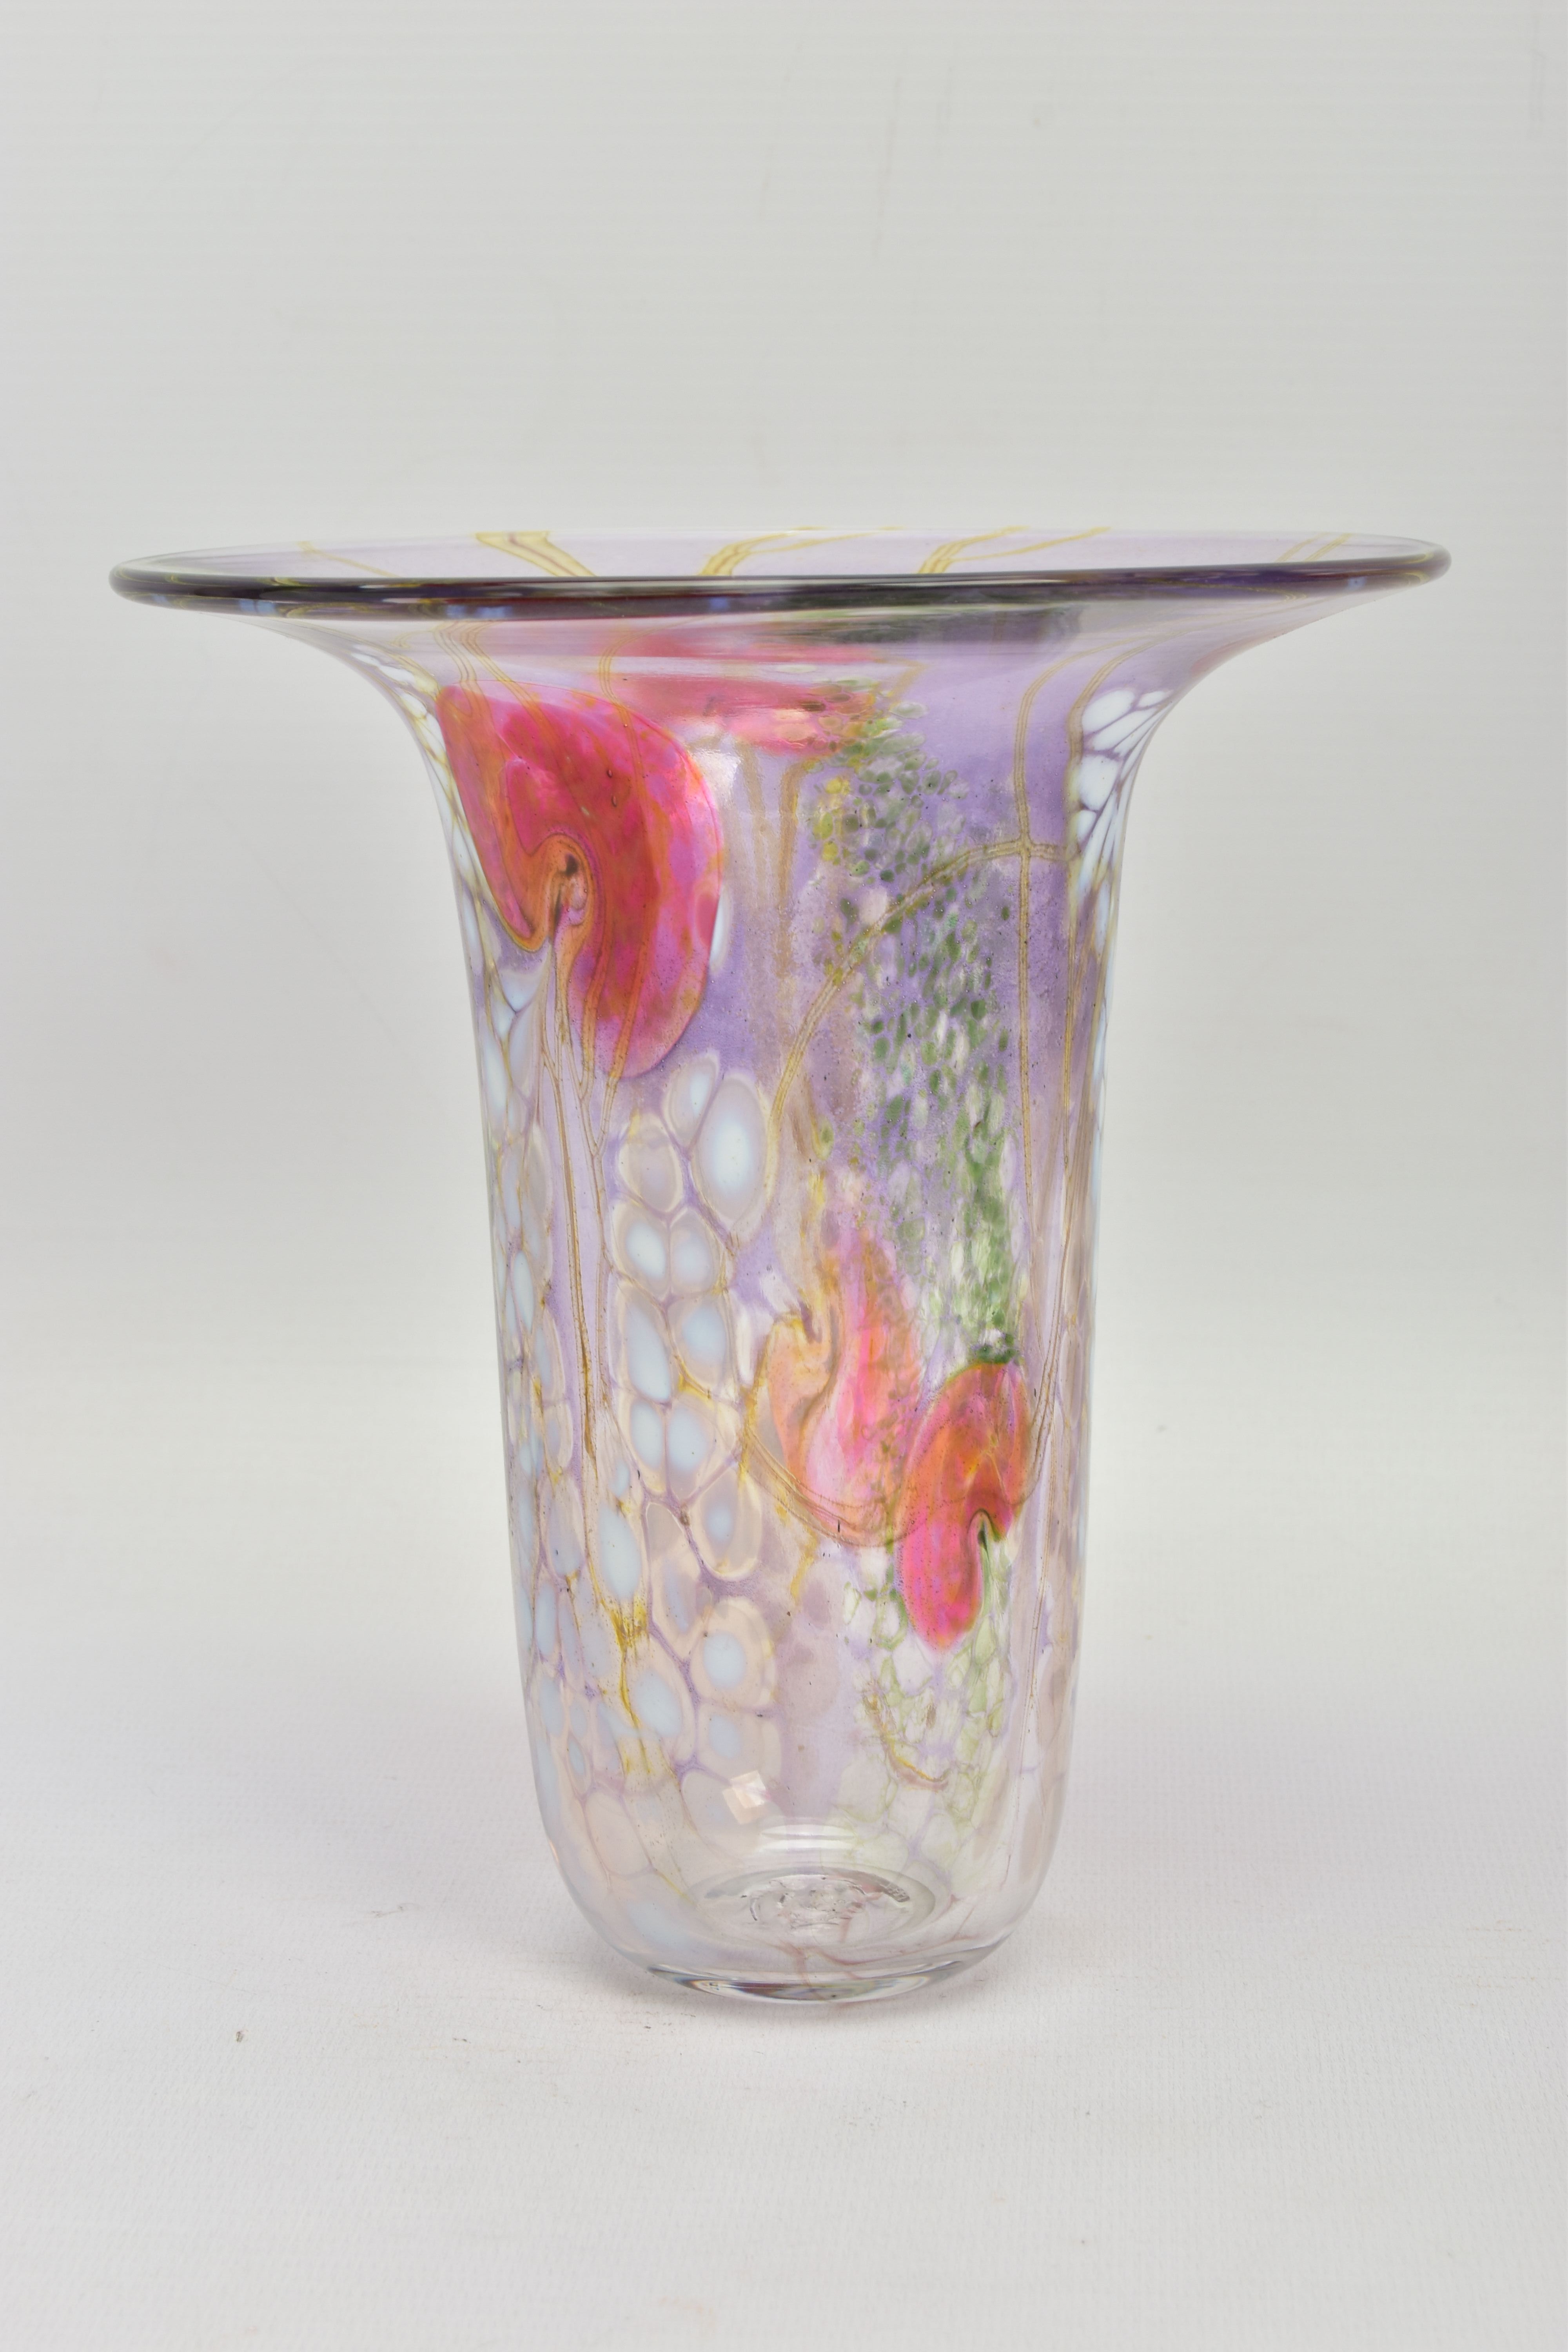 SIDDY LANGLEY (BRITISH CONTEMPORARY) A STUDIO GLASS VASE HAVING MOTTLED WHITE, GREEN AND RED - Image 2 of 8